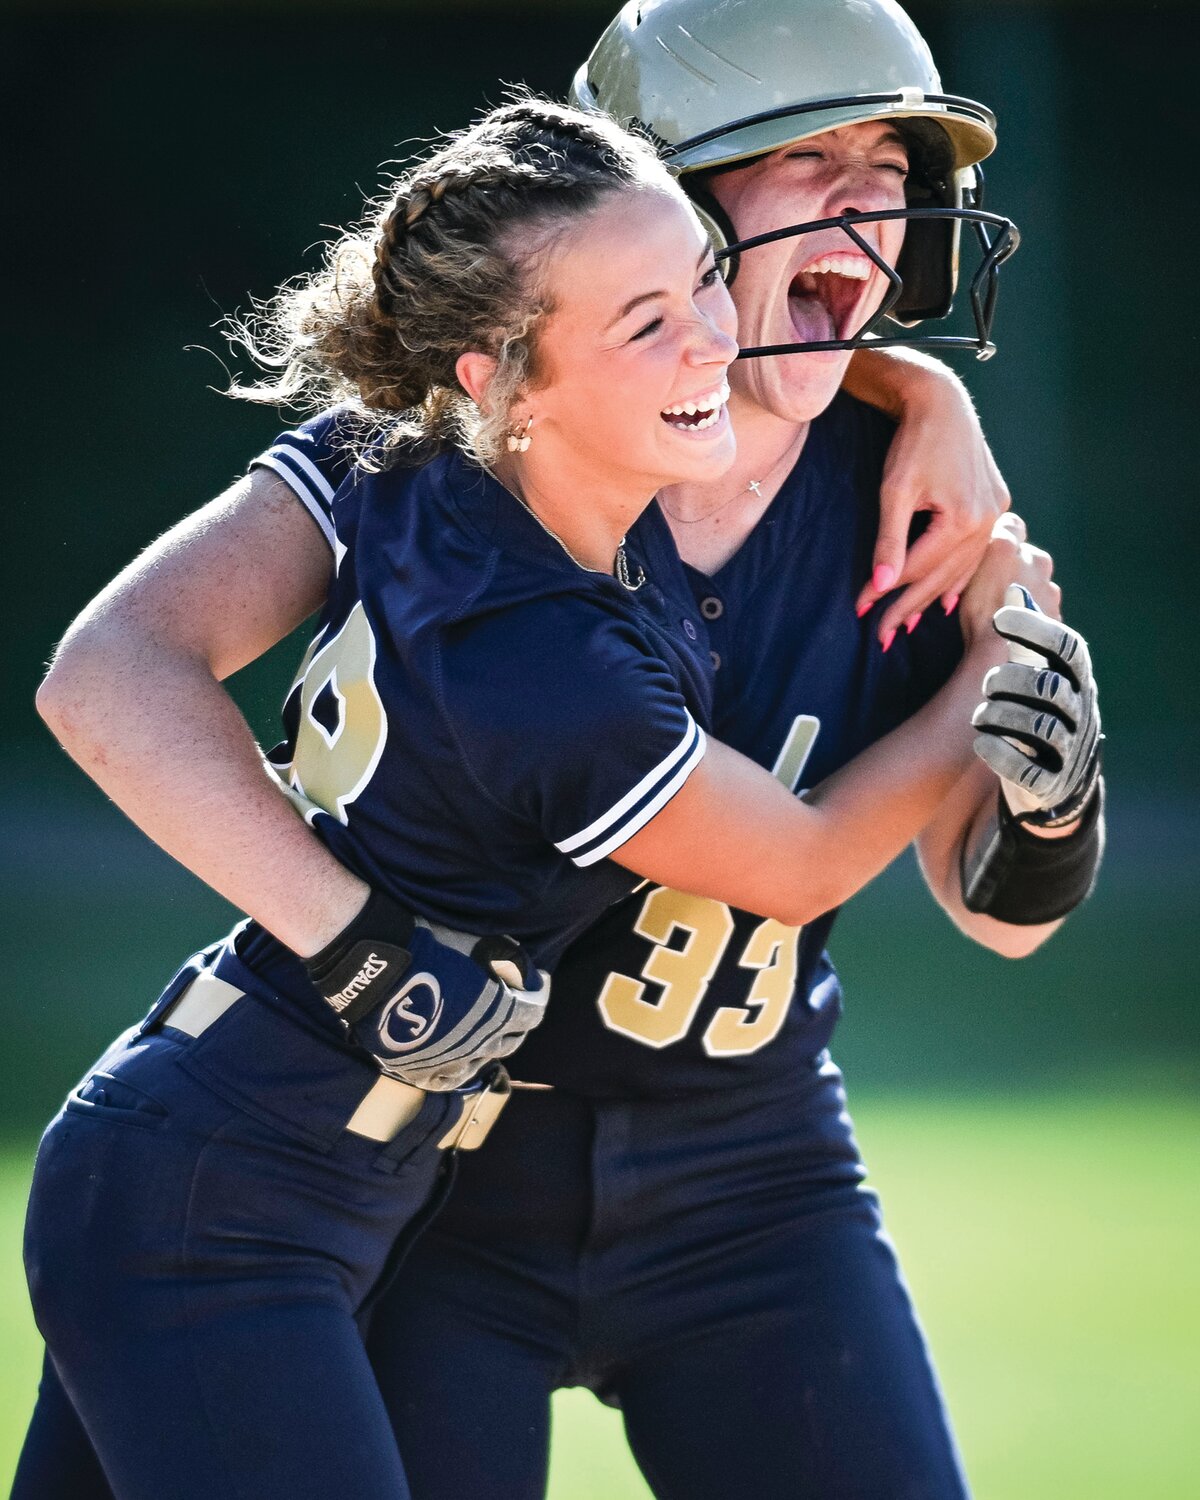 Council Rock South’s Maddie McLean hugs Shannon Williams after her game-winning walk-off hit.